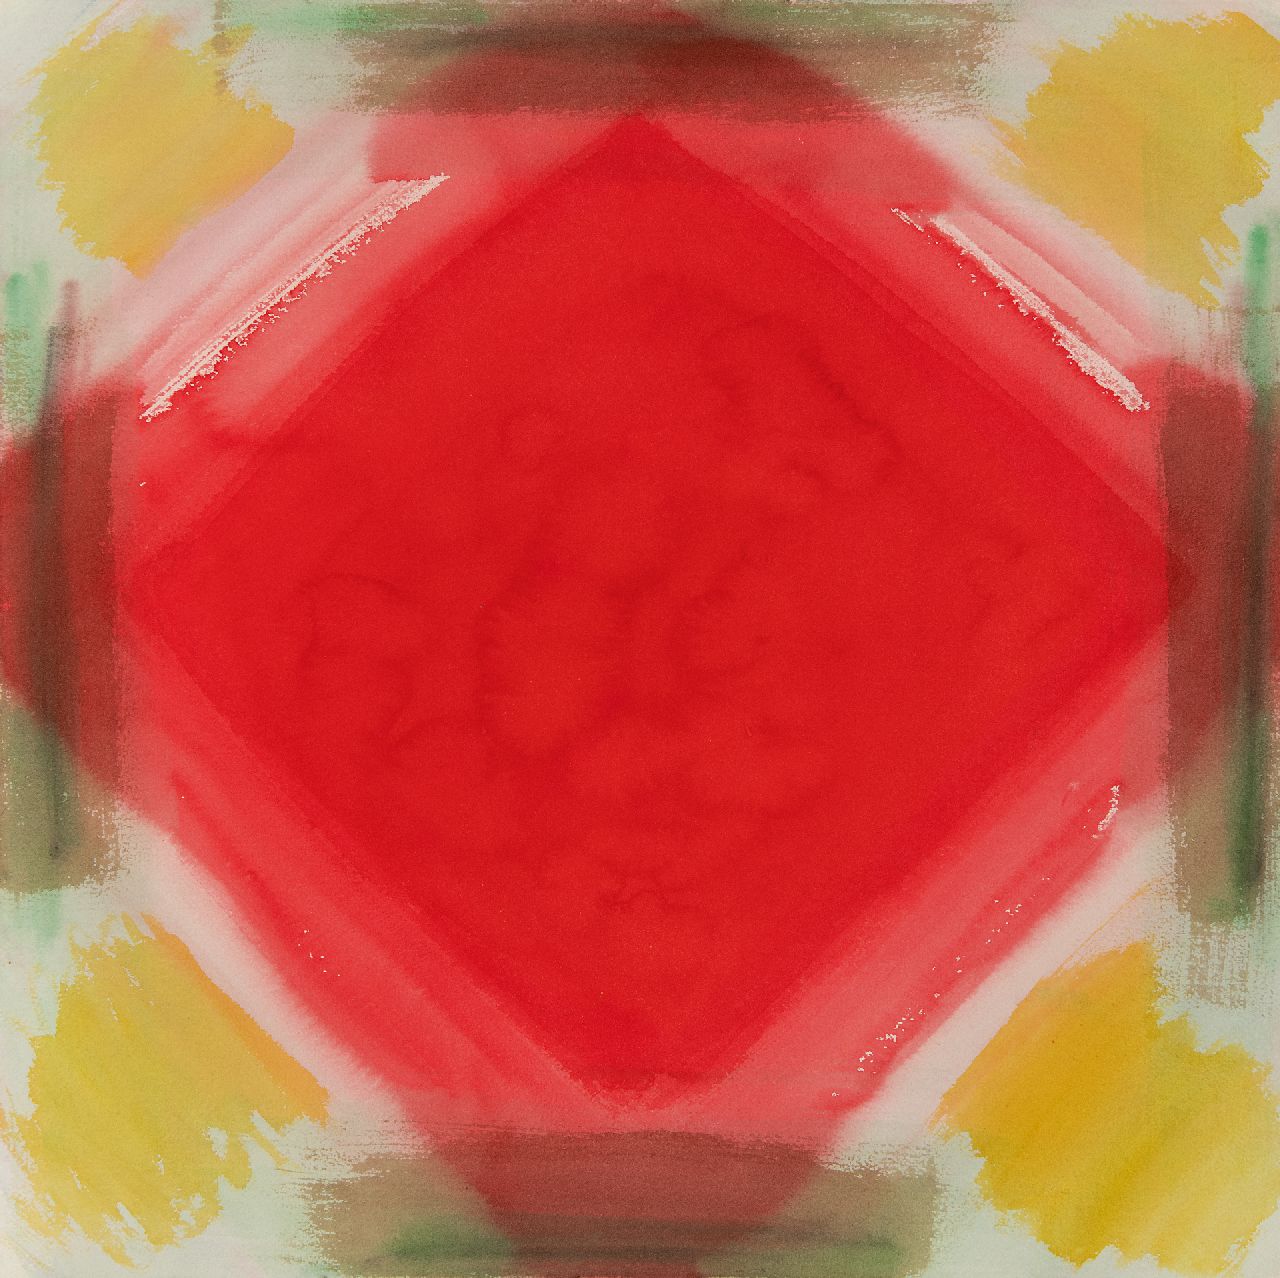 Nie E. de | Eric de Nie | Watercolours and drawings offered for sale | Kaleidoscoop, watercolour on paper 56.5 x 56.5 cm, signed on the reverse and executed 1987